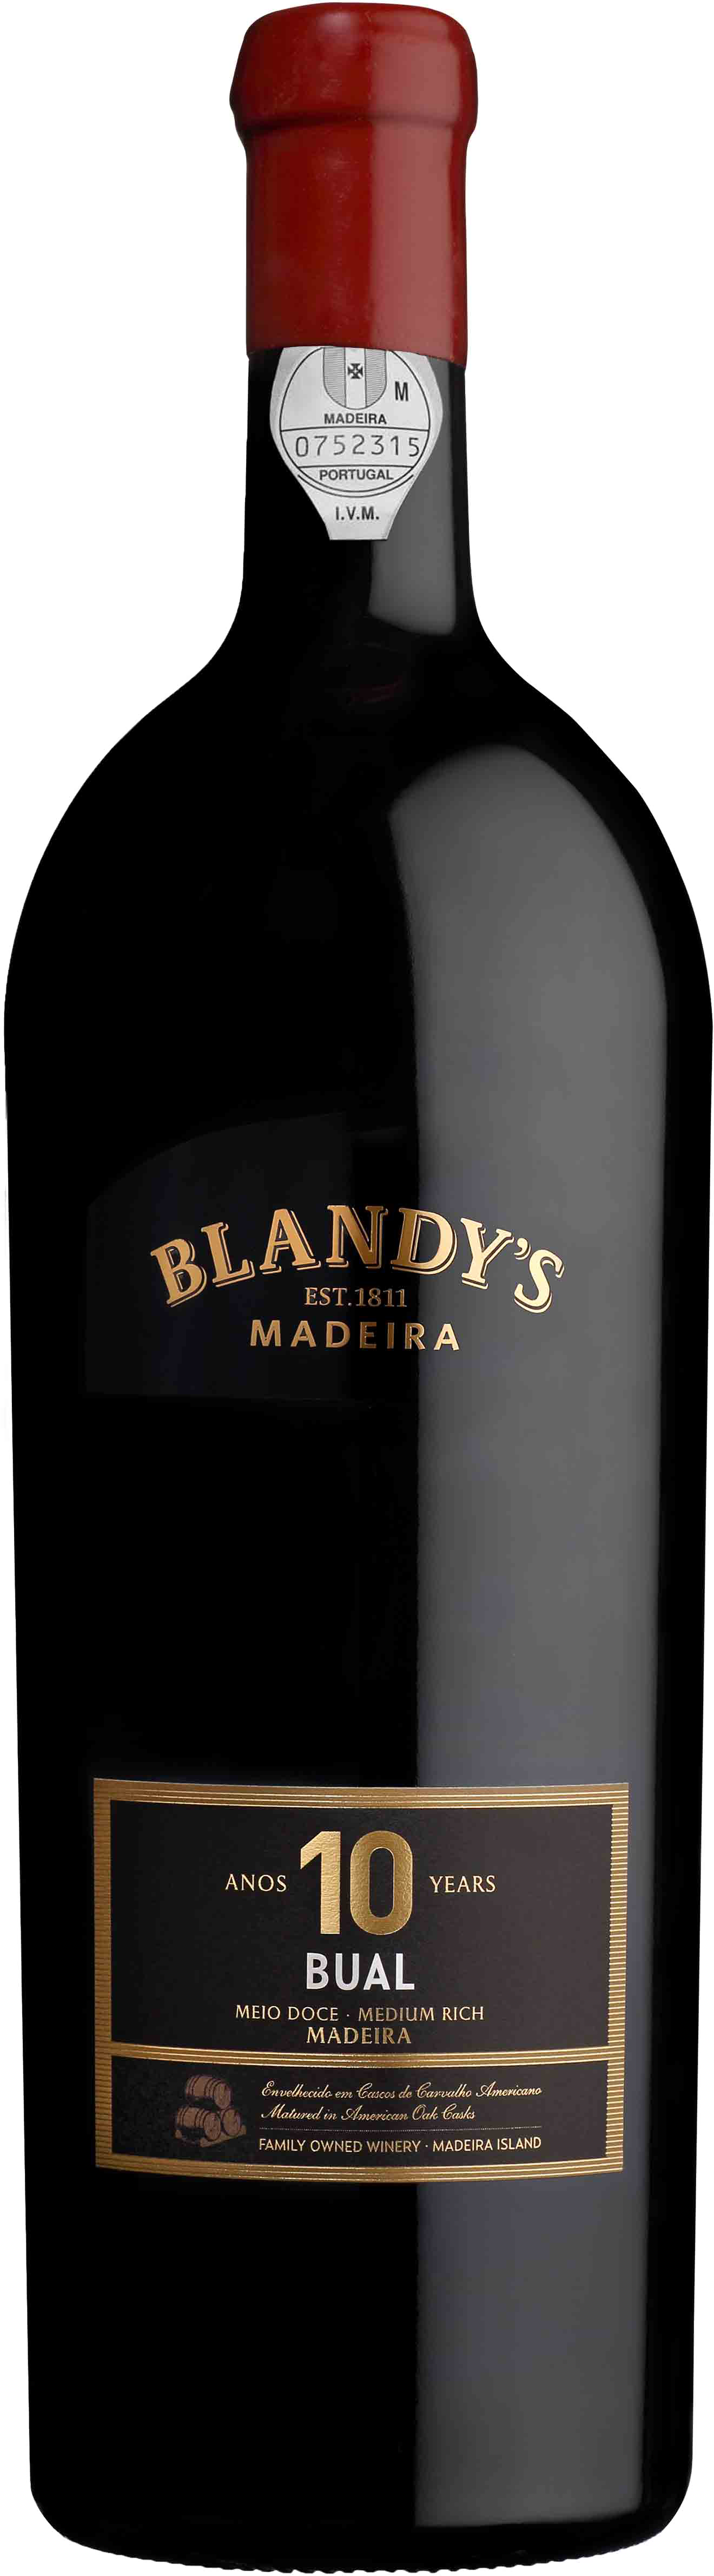 Product Image for BLANDY'S BUAL 10 YEAR OLD - DOUBLE MAGNUM (3L)